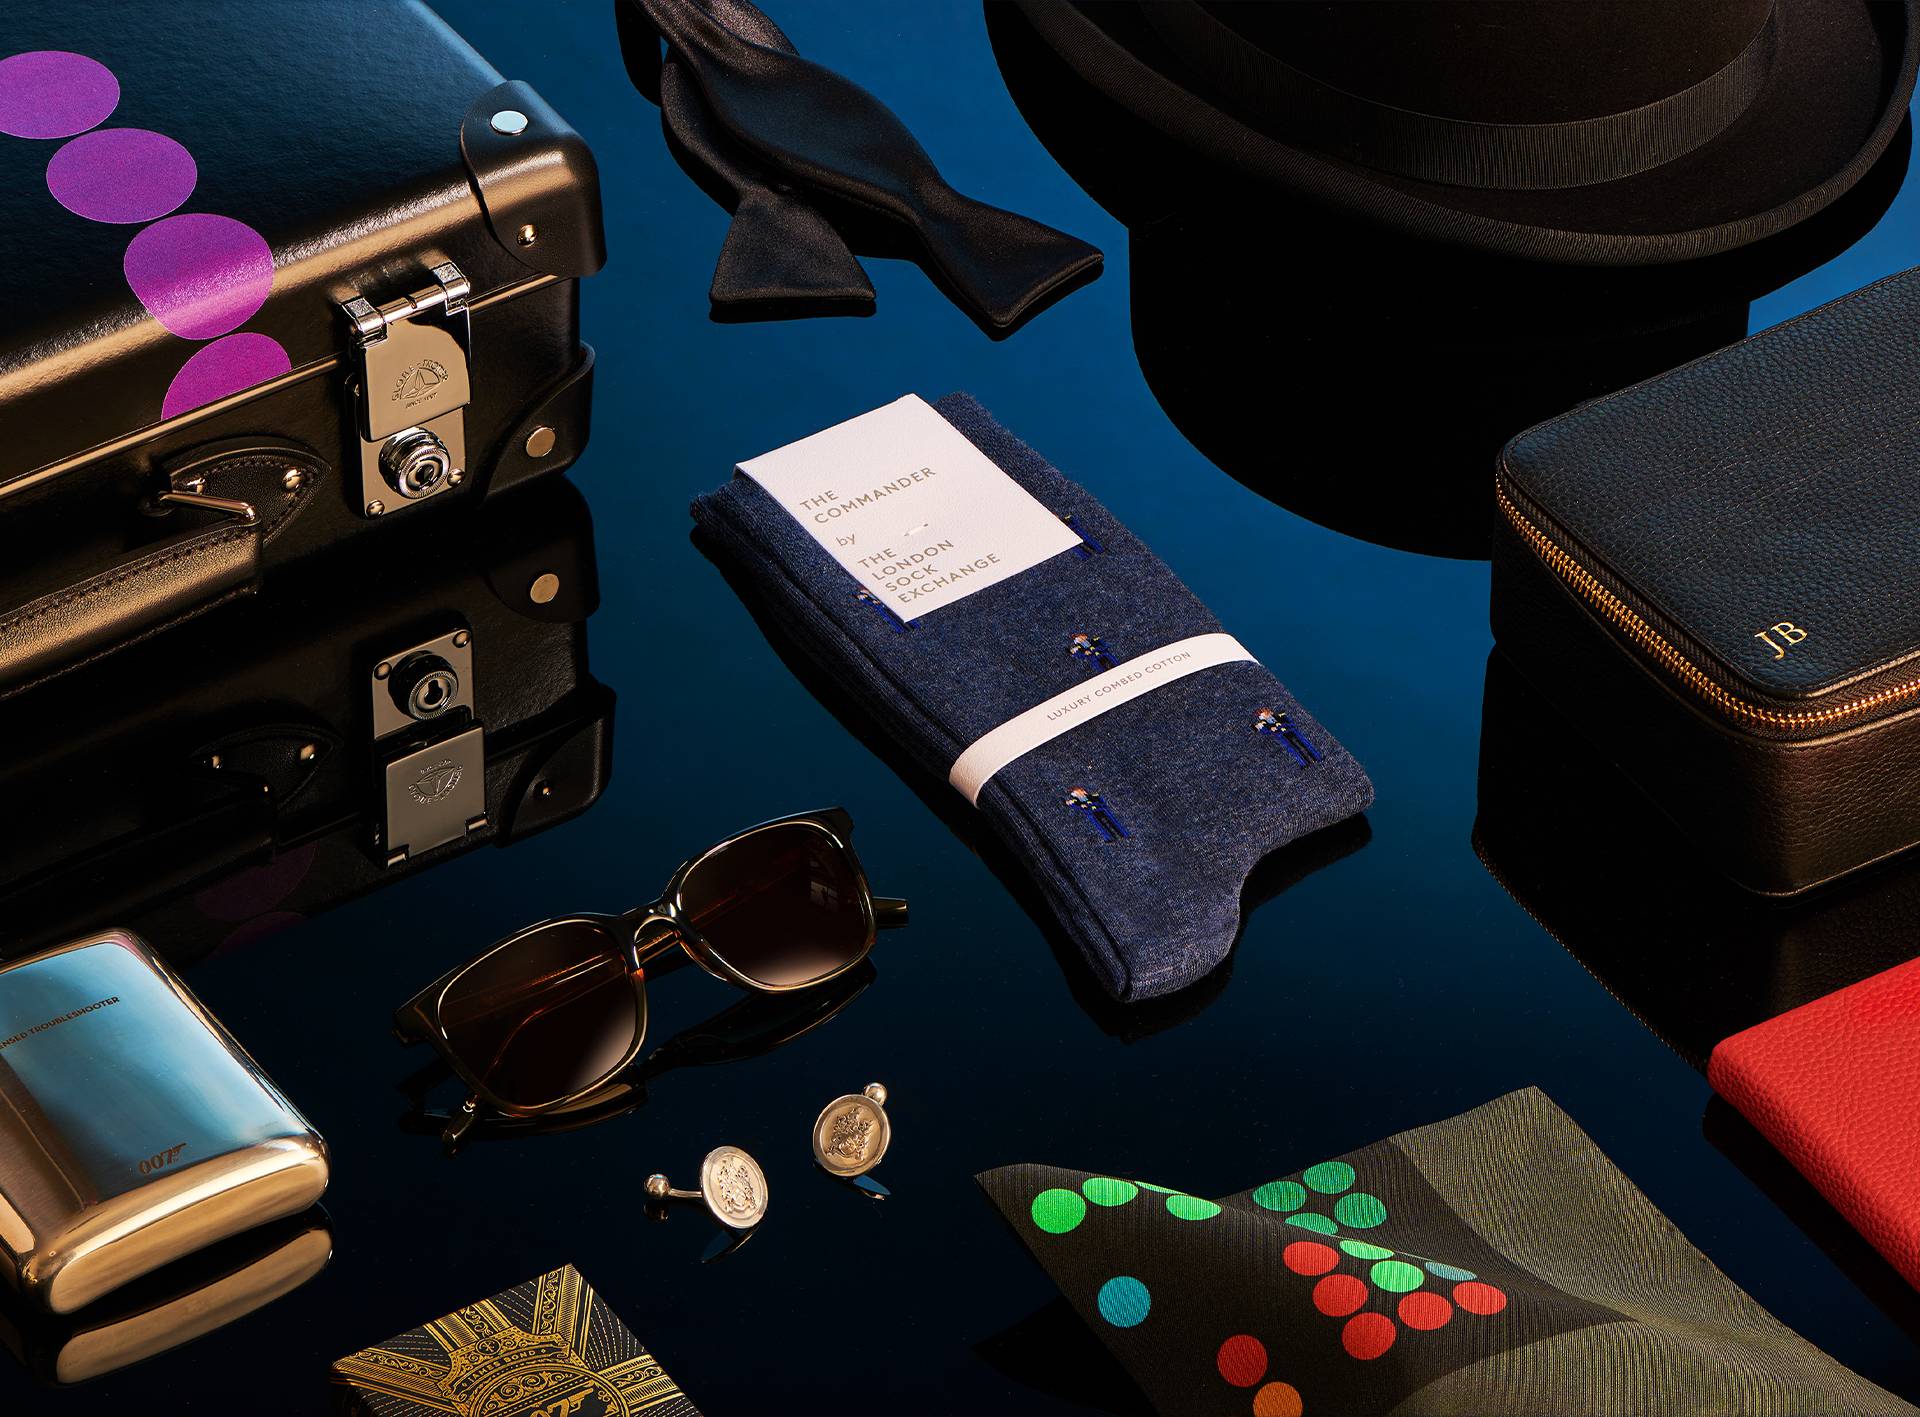 The 007 Father’s Day Gift Guide